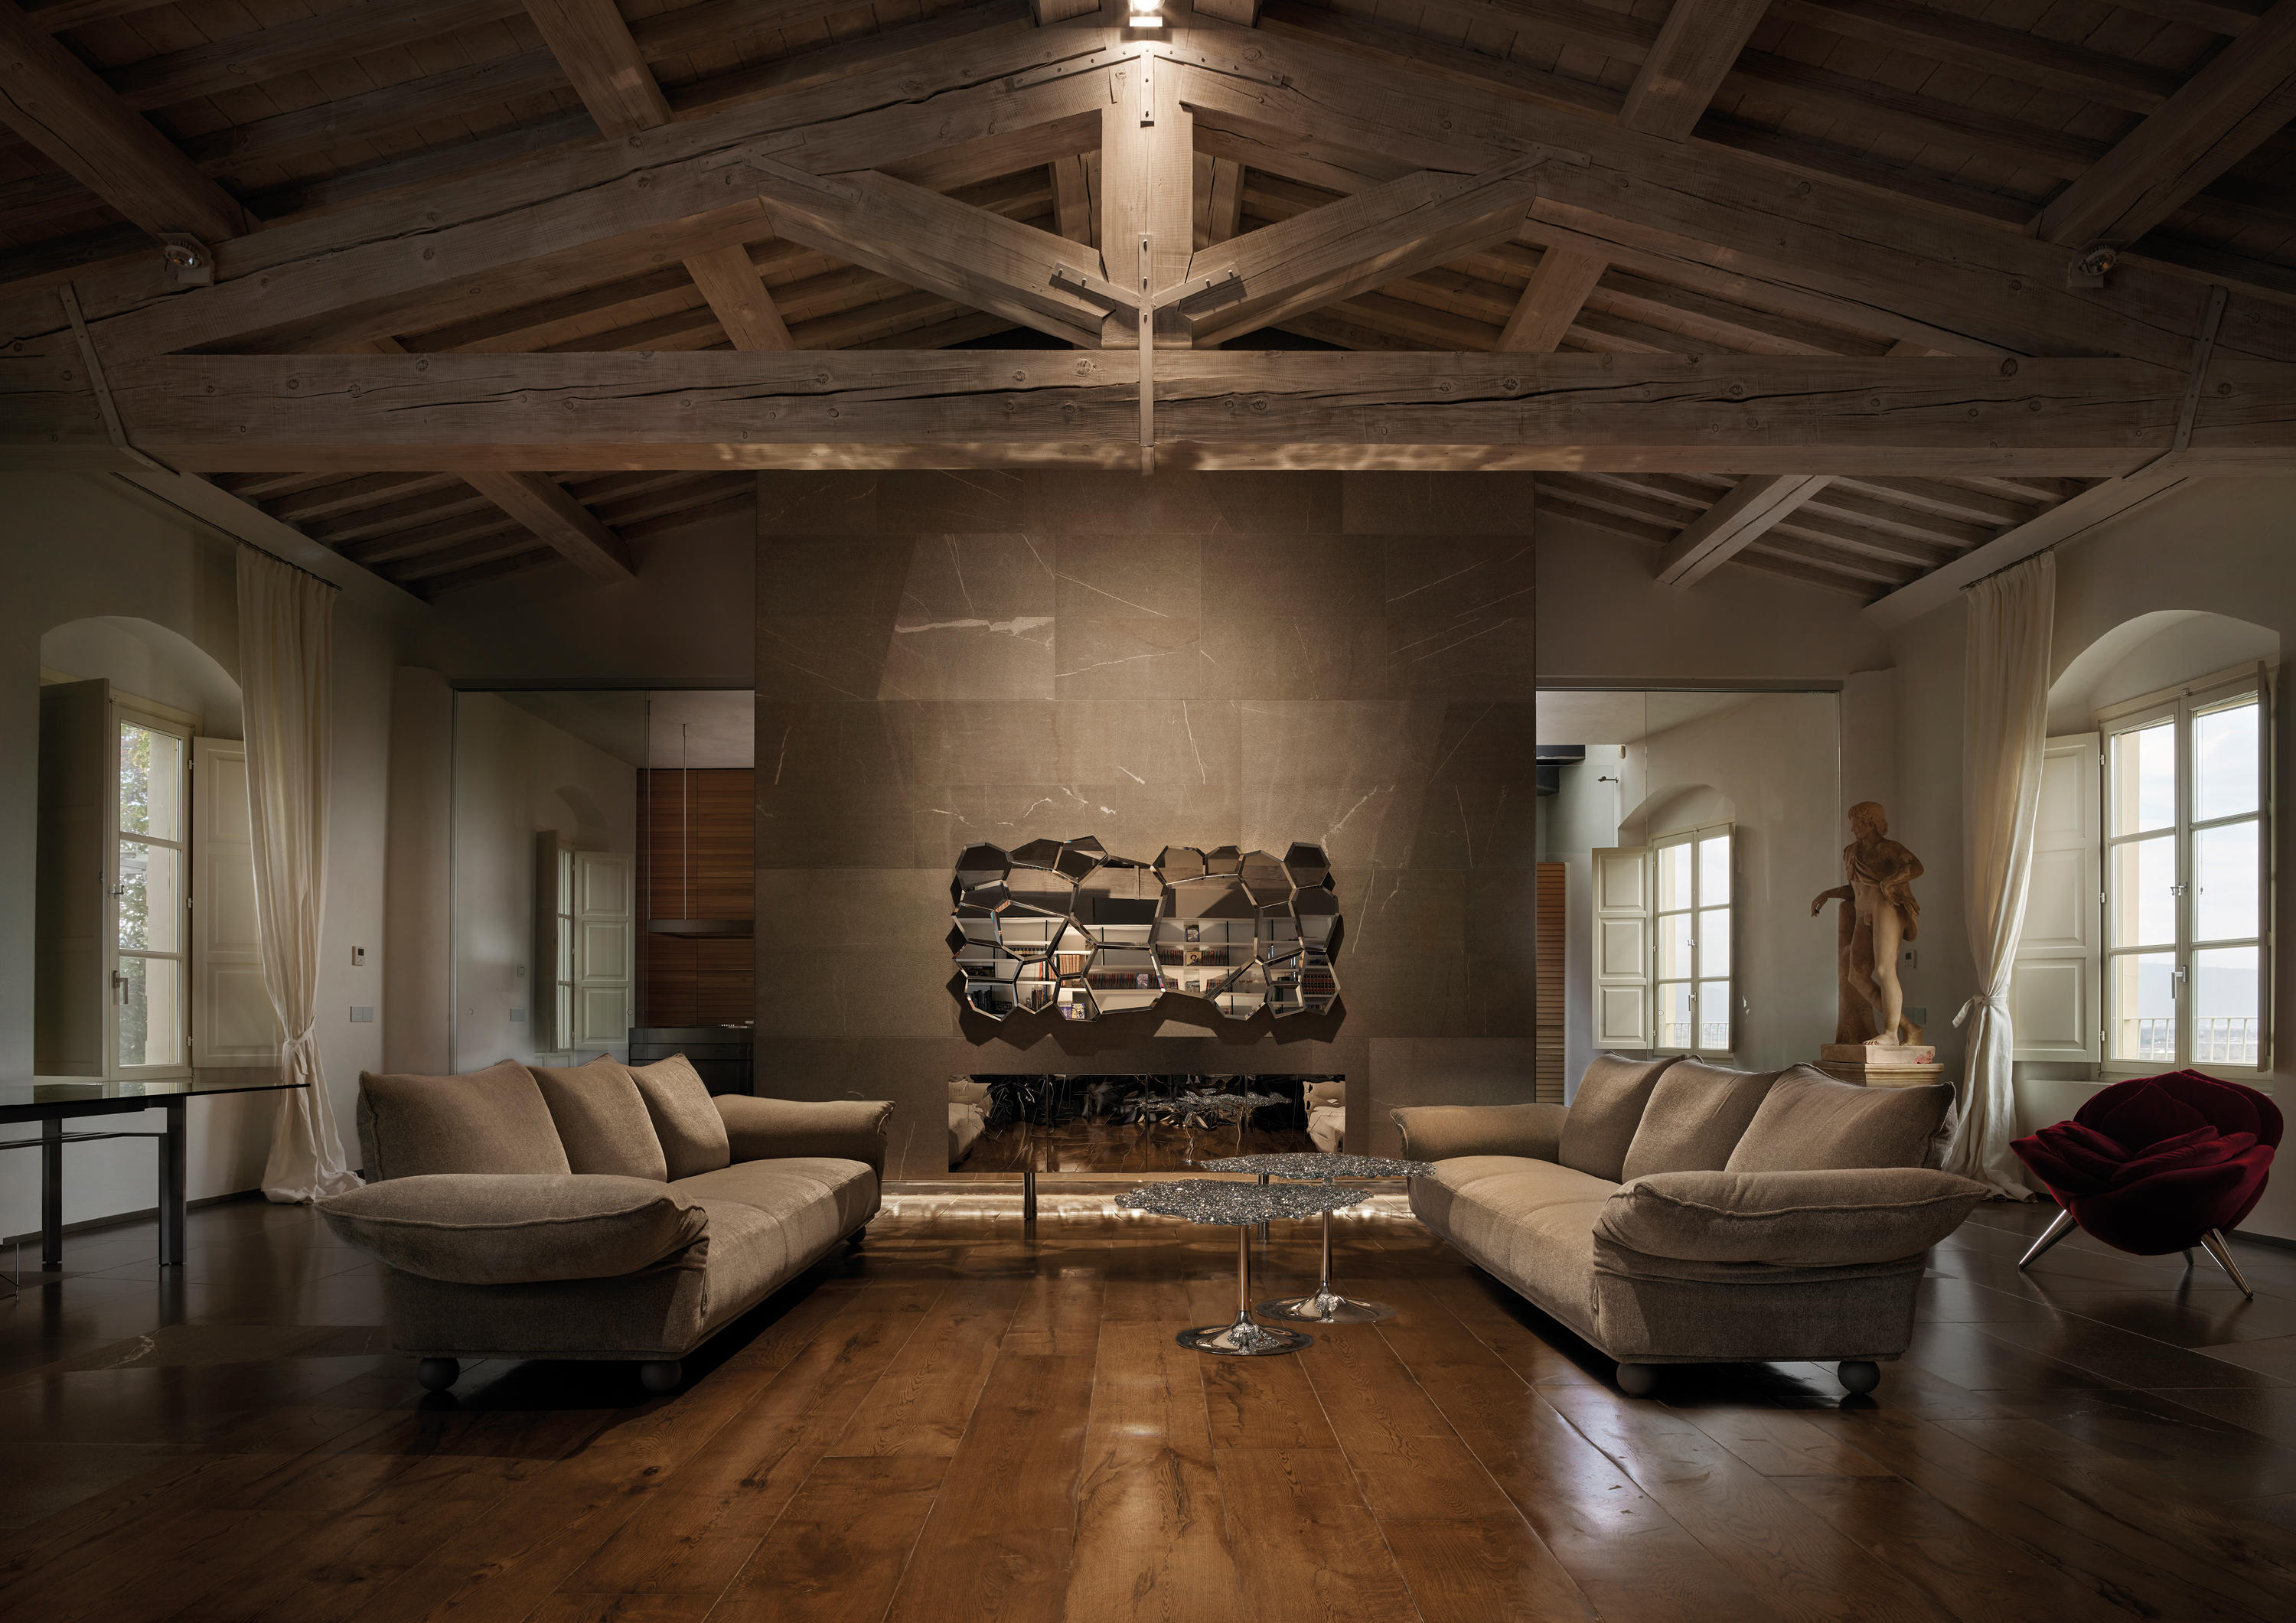 STANDWAY - Sofas from Edra spa | Architonic